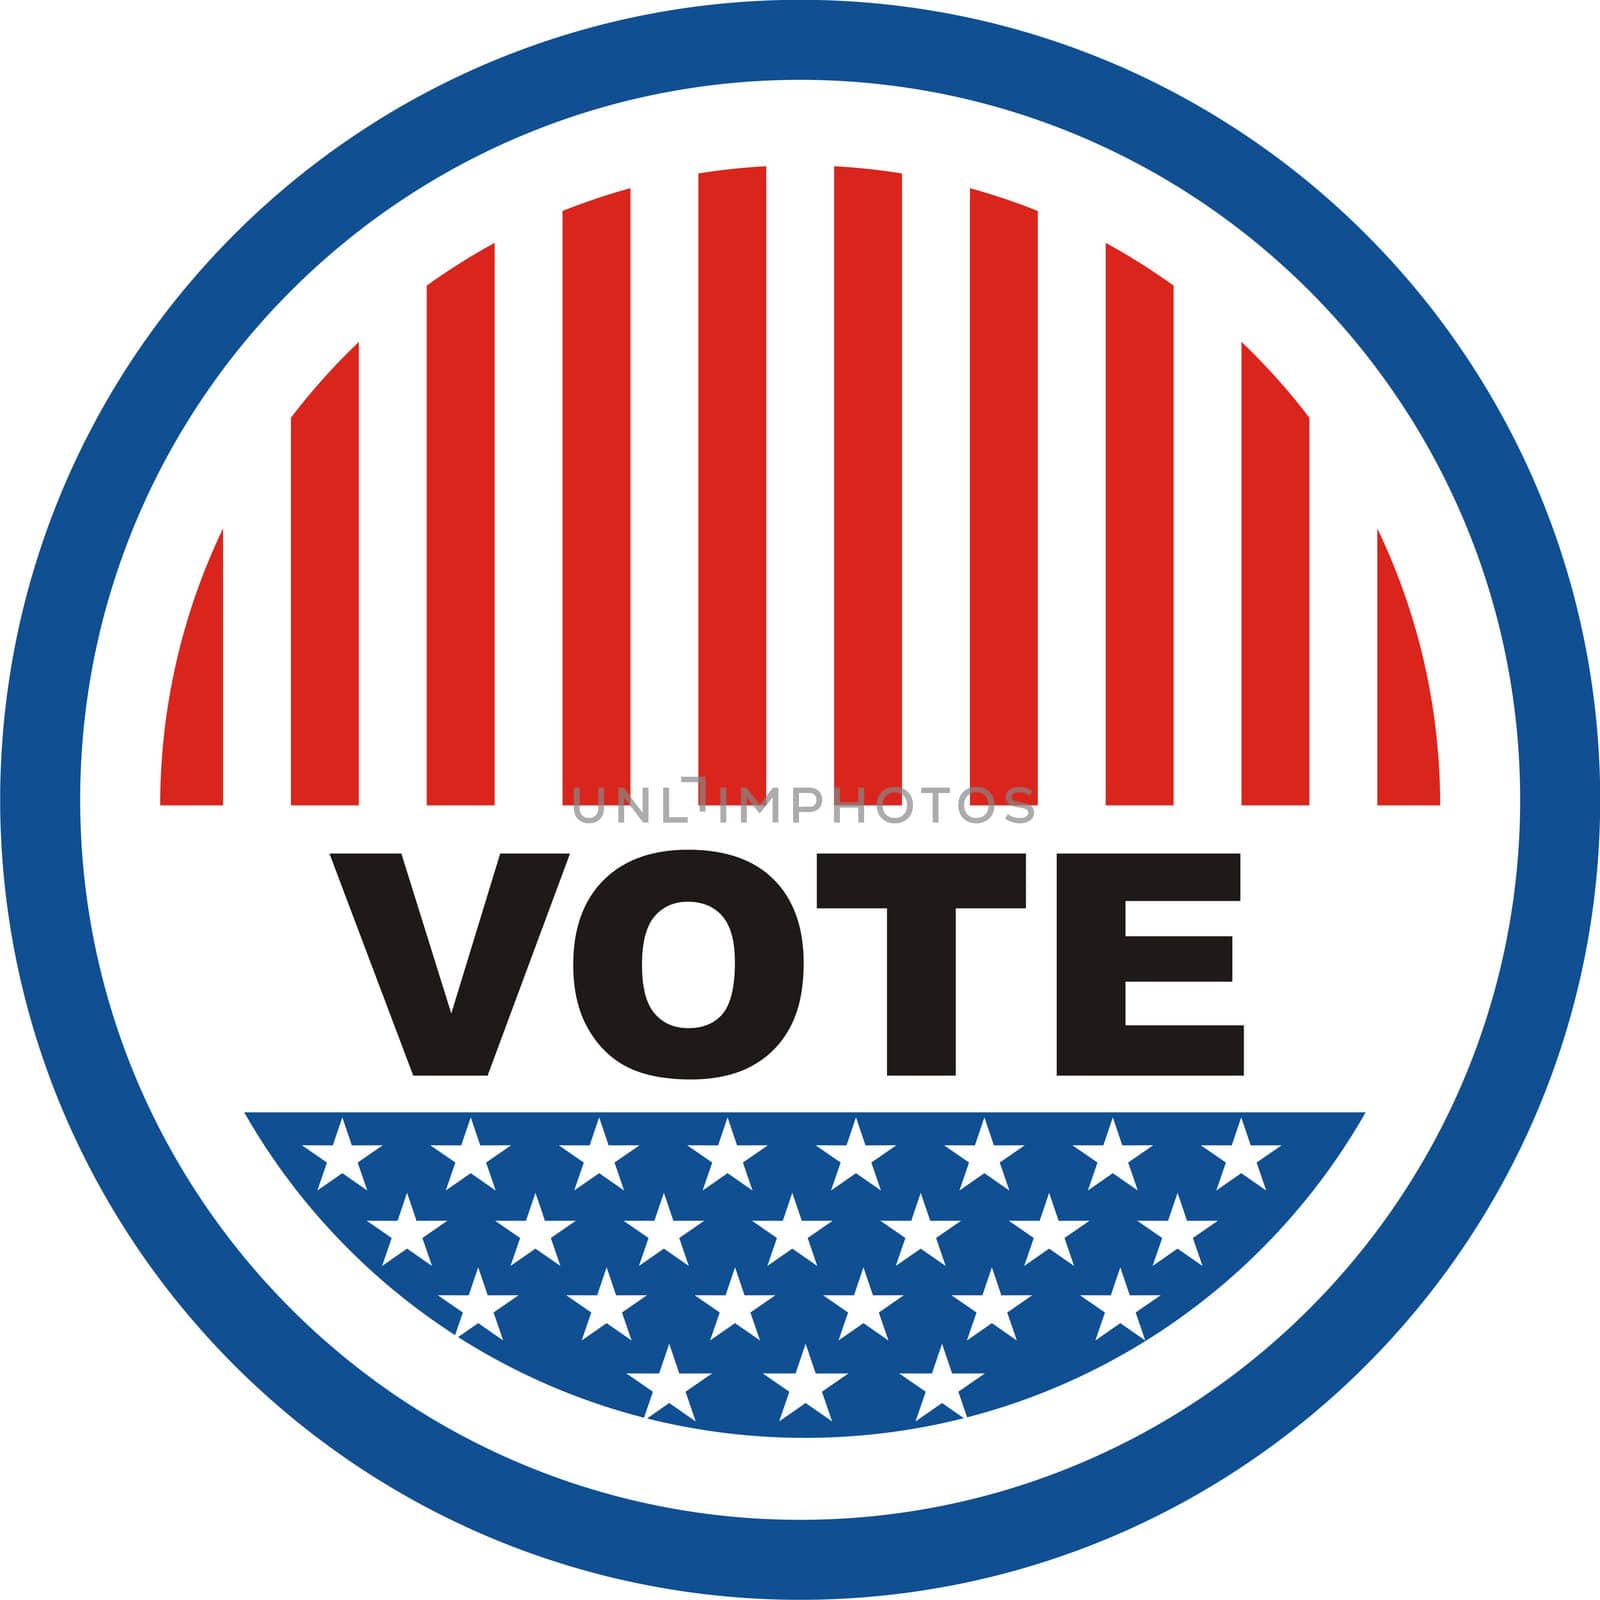 your vote counts usa election badge illustration